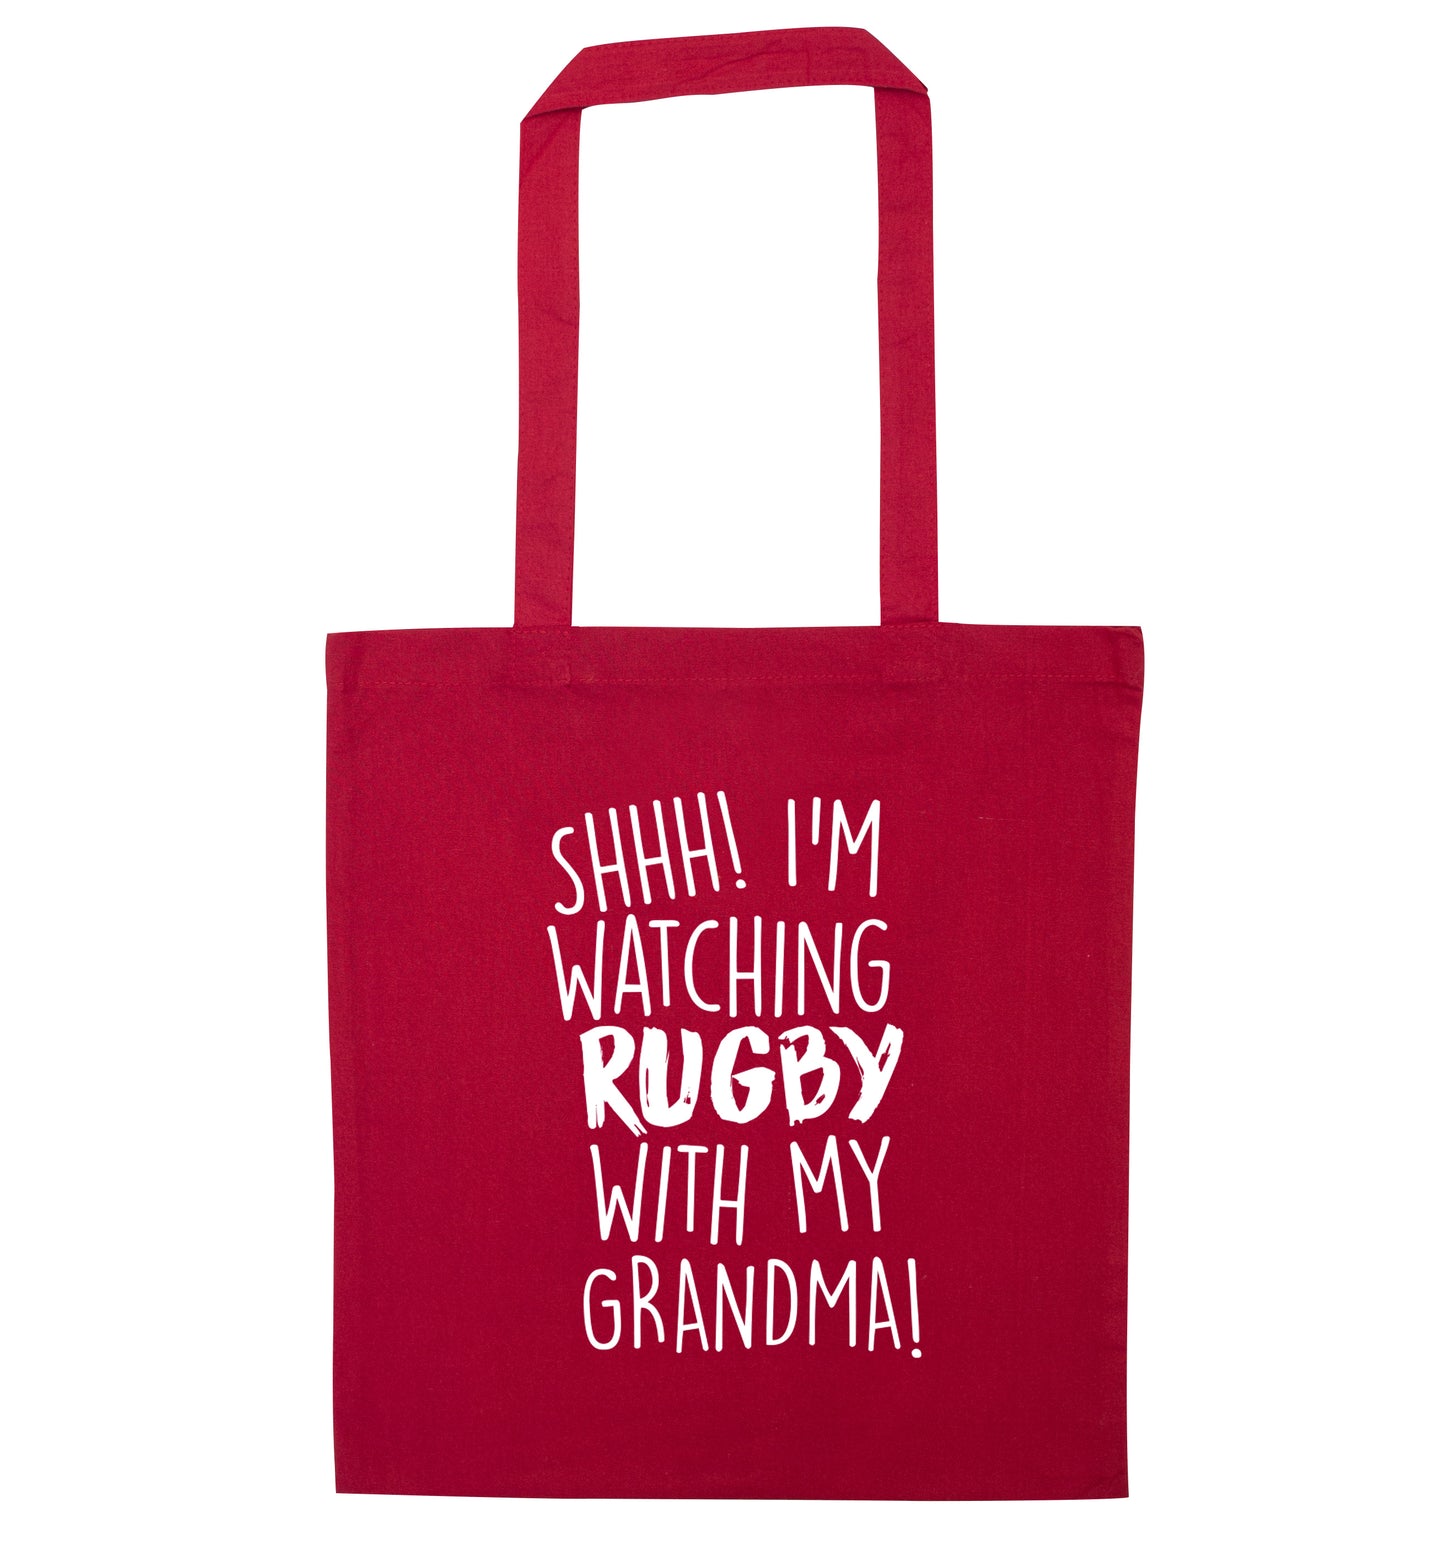 Shh I'm watching rugby with my grandma red tote bag